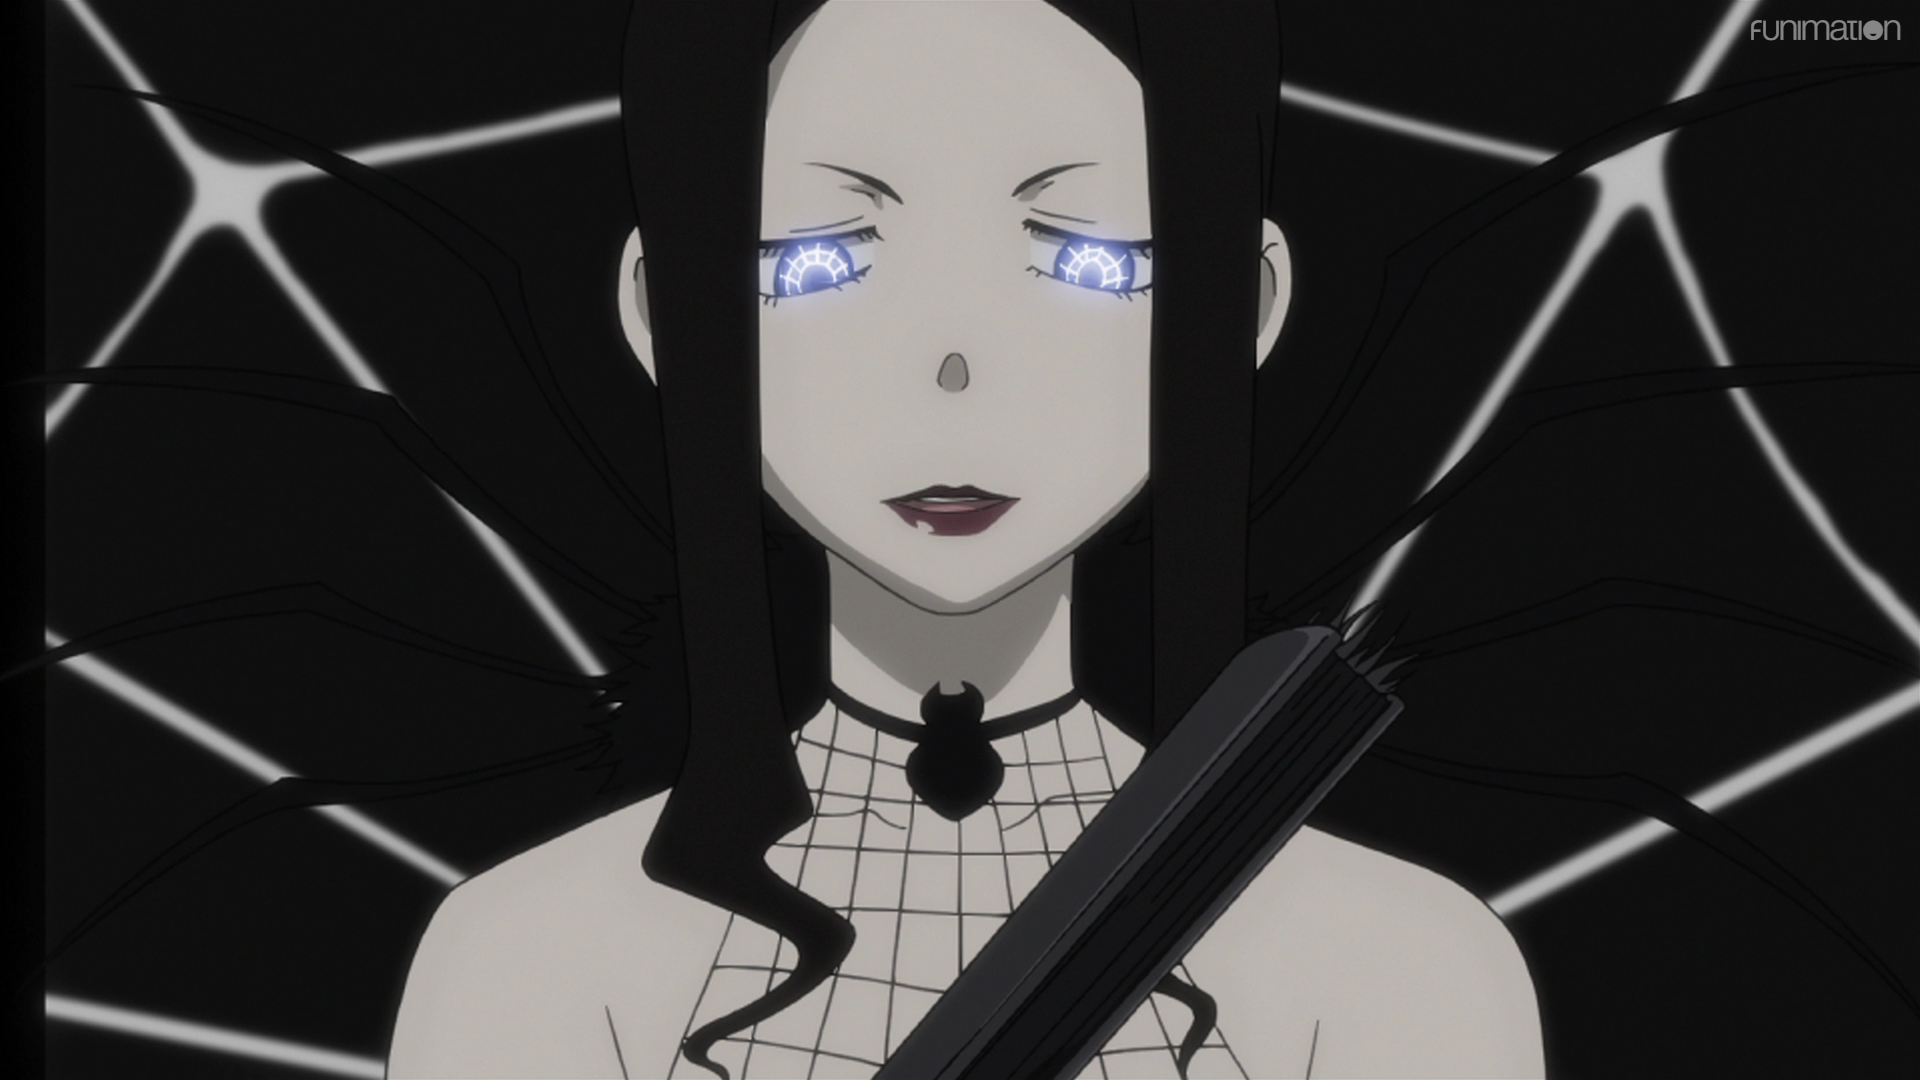 Arachne Gorgon's irises shine with a glowing, spiderweb pattern in a scene from the Soul Eater TV anime.